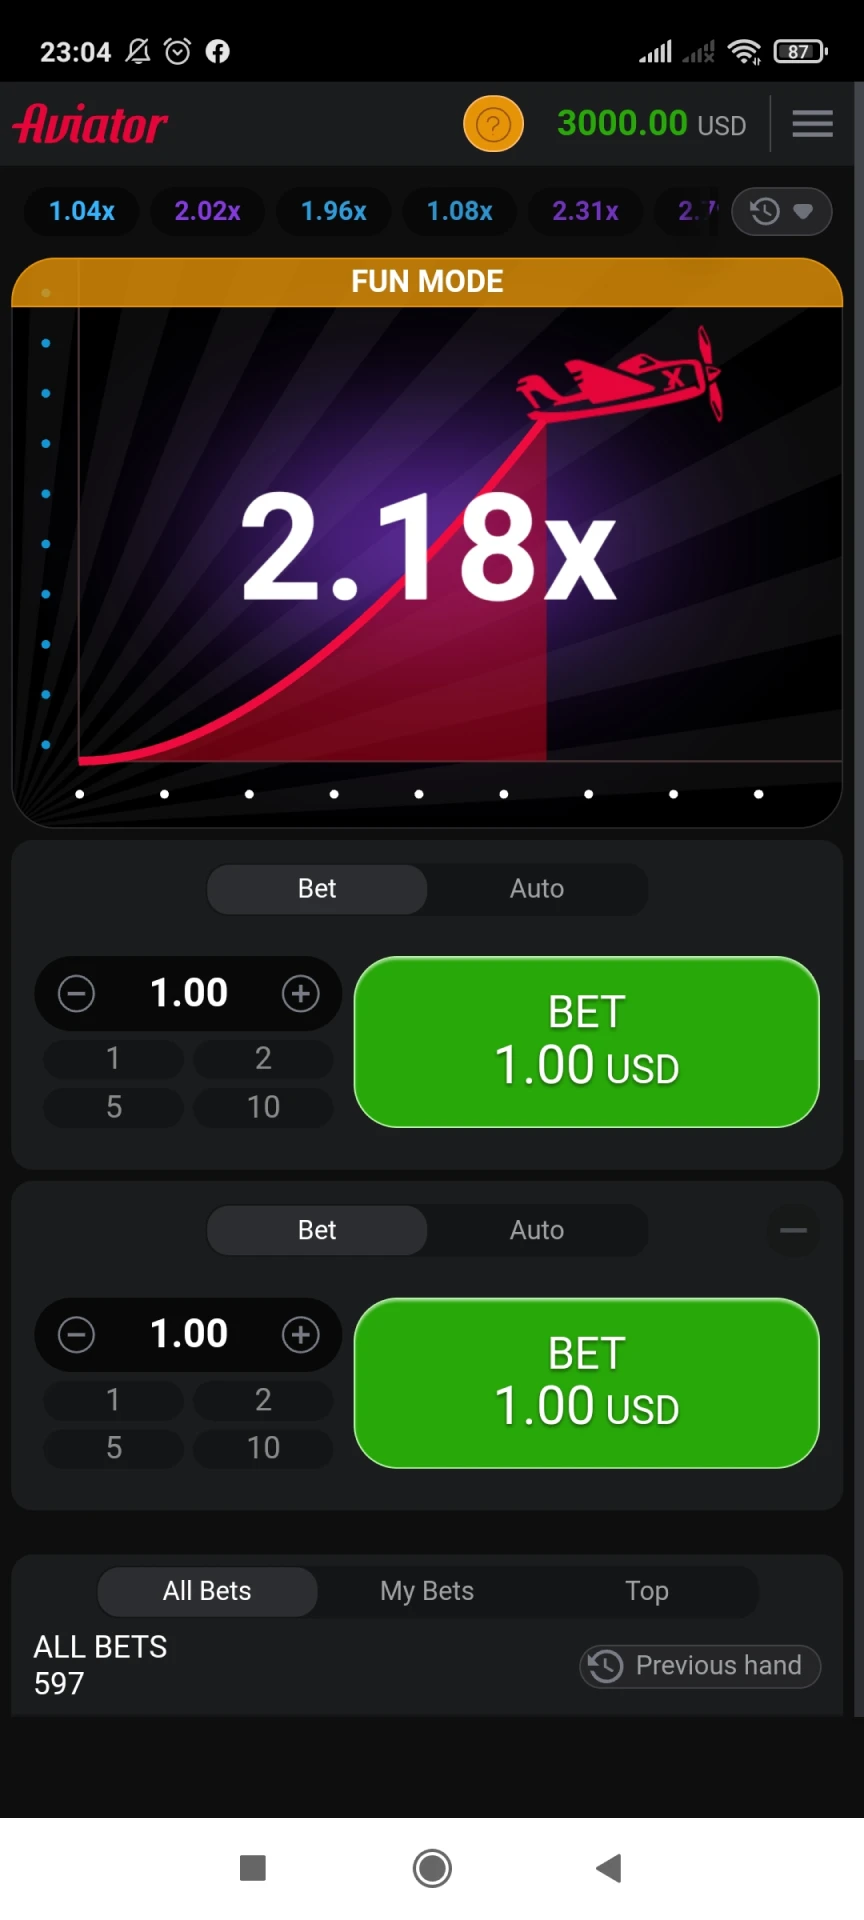 Now you can play Aviator in the 1xbet application for Android.